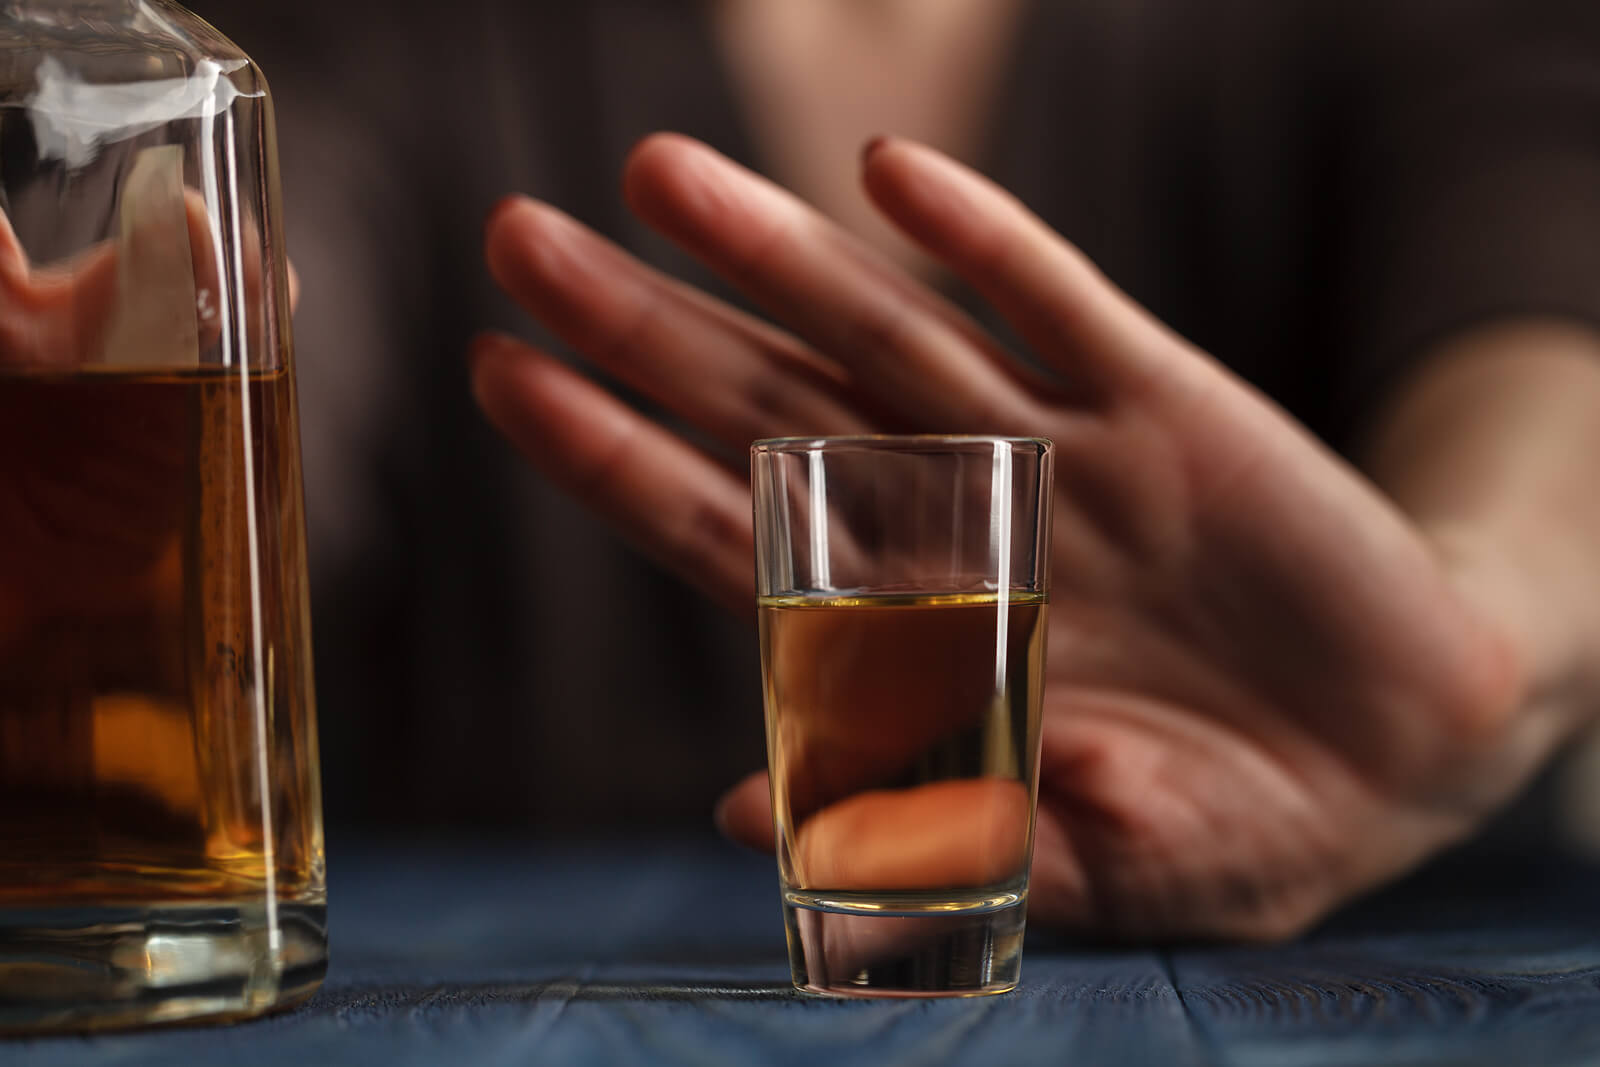 Hand pushing away a glass of whiskey in an attempt to remain sober.